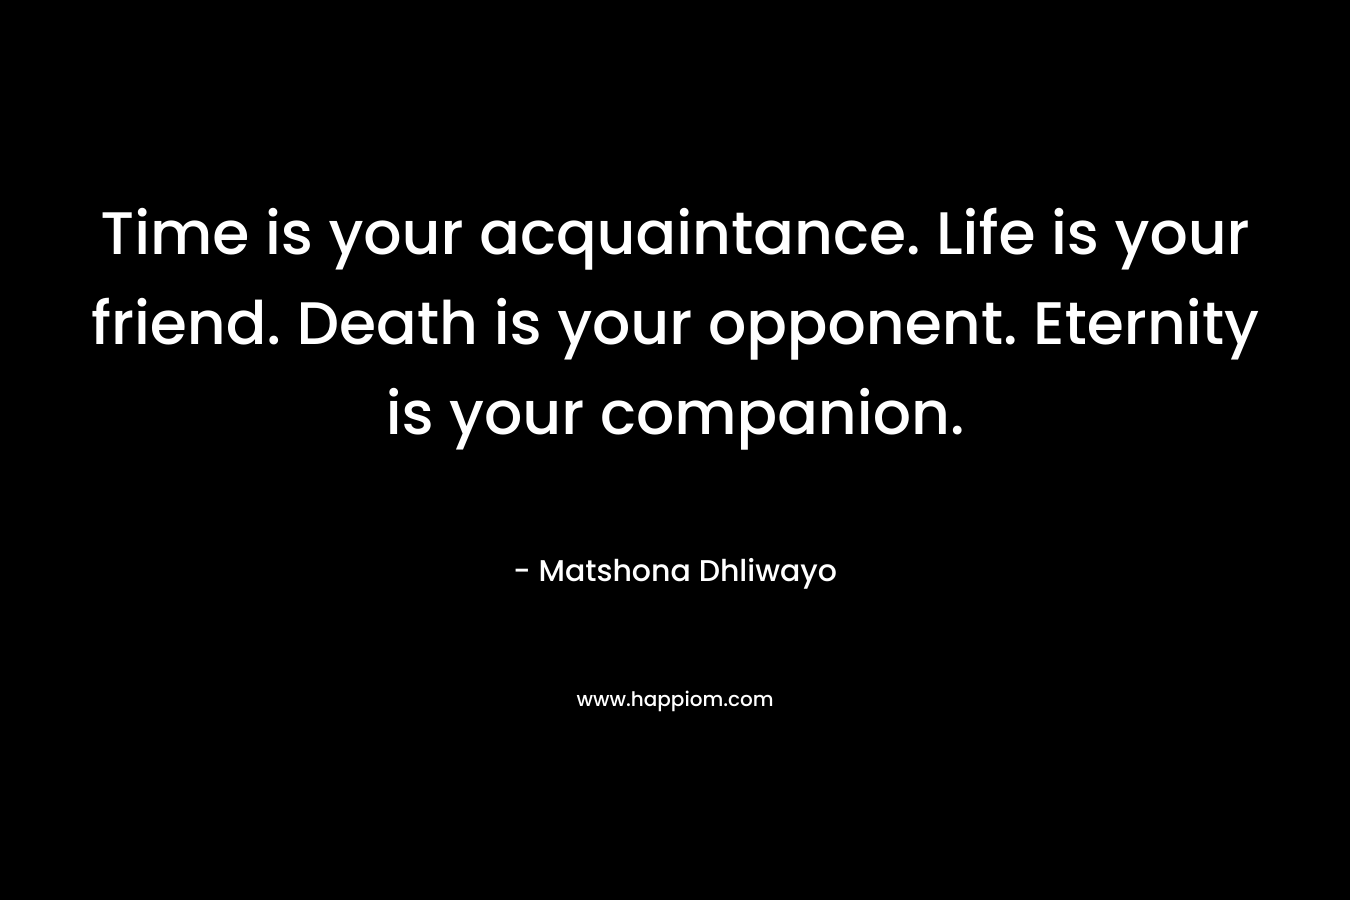 Time is your acquaintance. Life is your friend. Death is your opponent. Eternity is your companion.